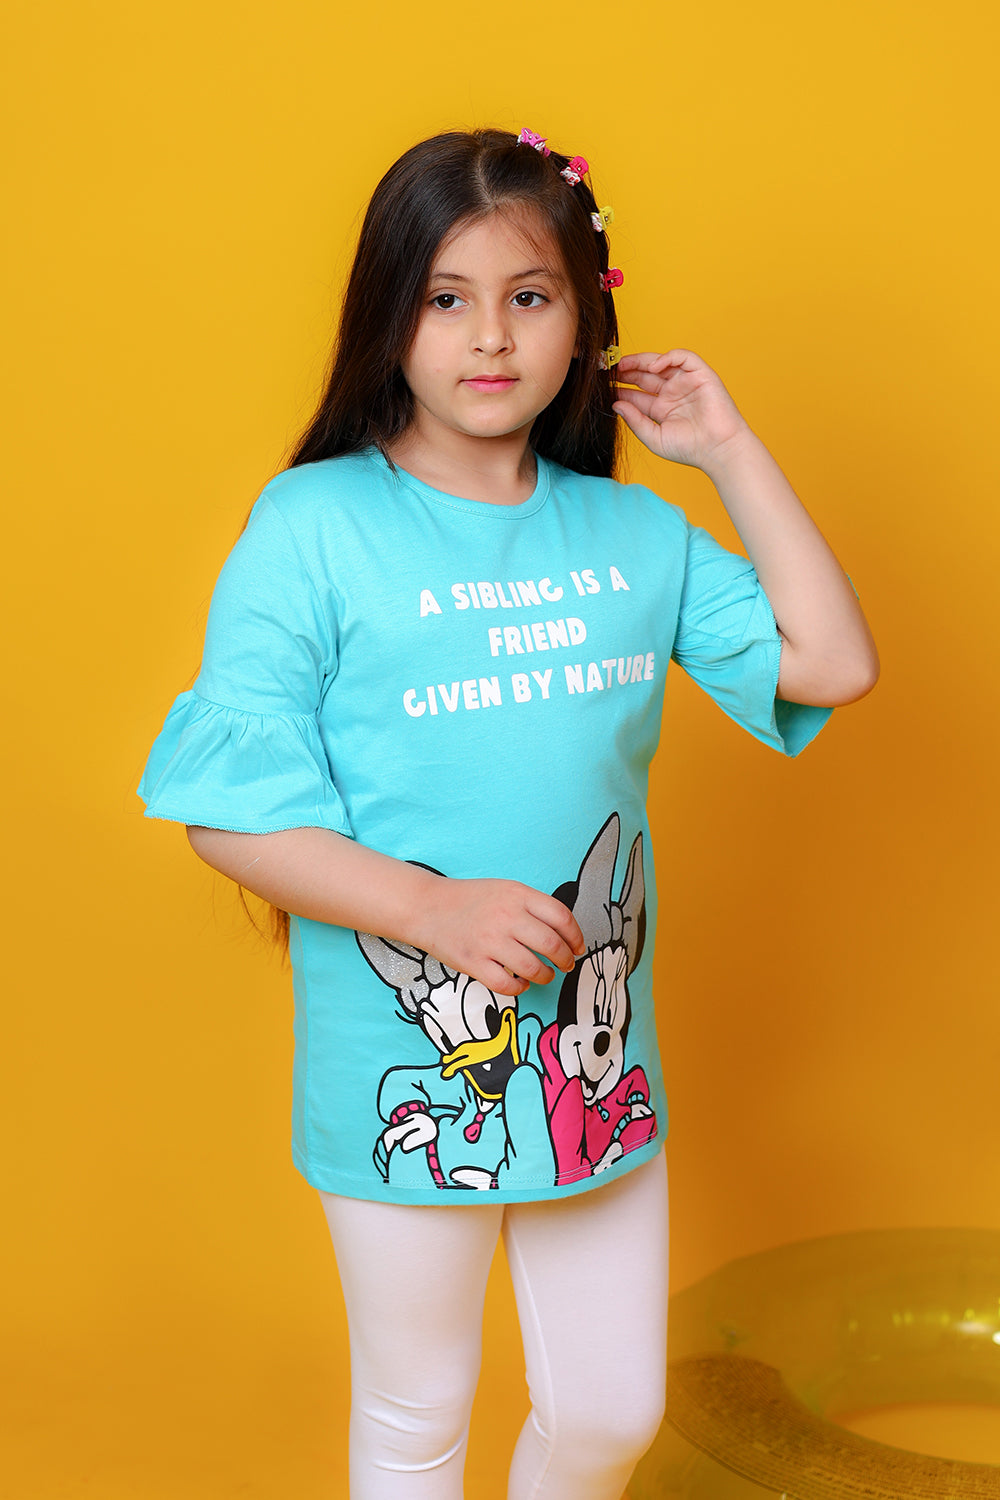 Donald Duck & Mini Mouse graphic T-shirt 100% cotton jersey fabric